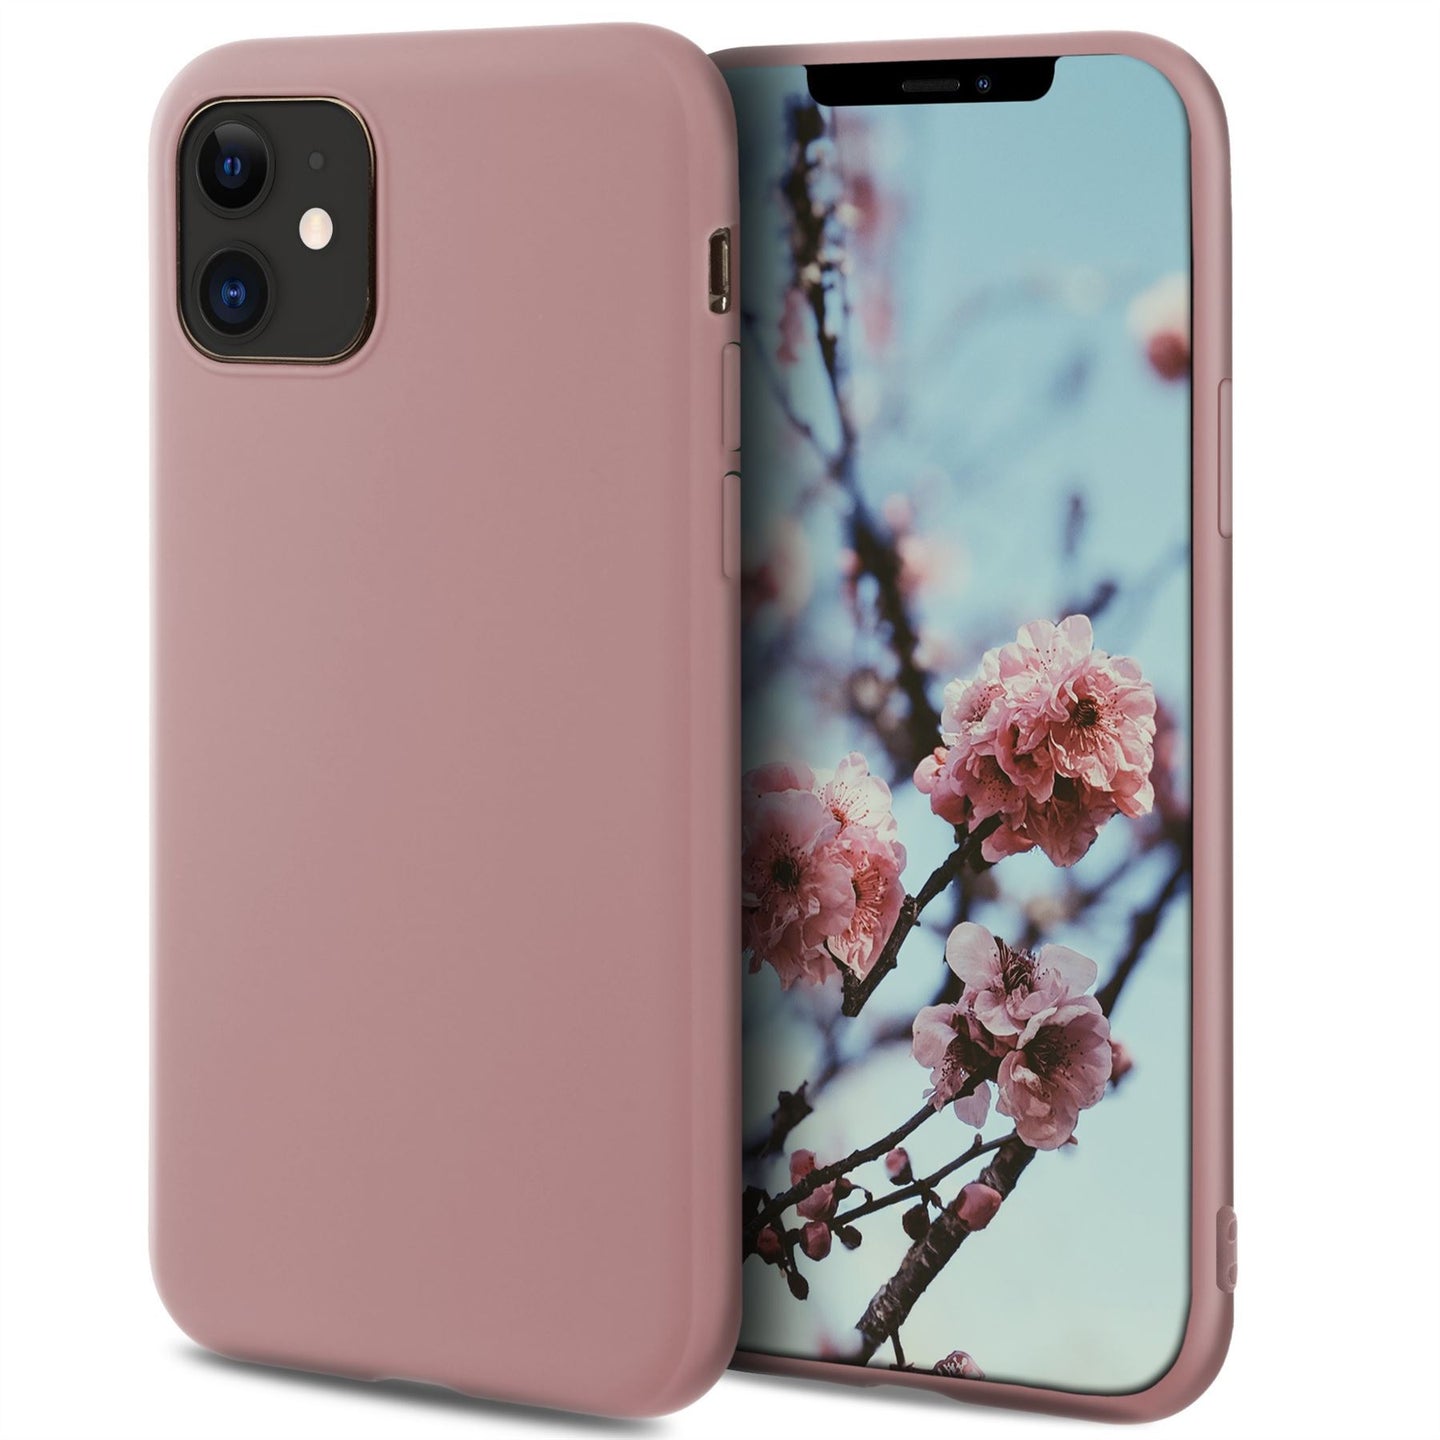 Moozy Minimalist Series Silicone Case for iPhone 12, iPhone 12 Pro, Rose Beige - Matte Finish Slim Soft TPU Cover